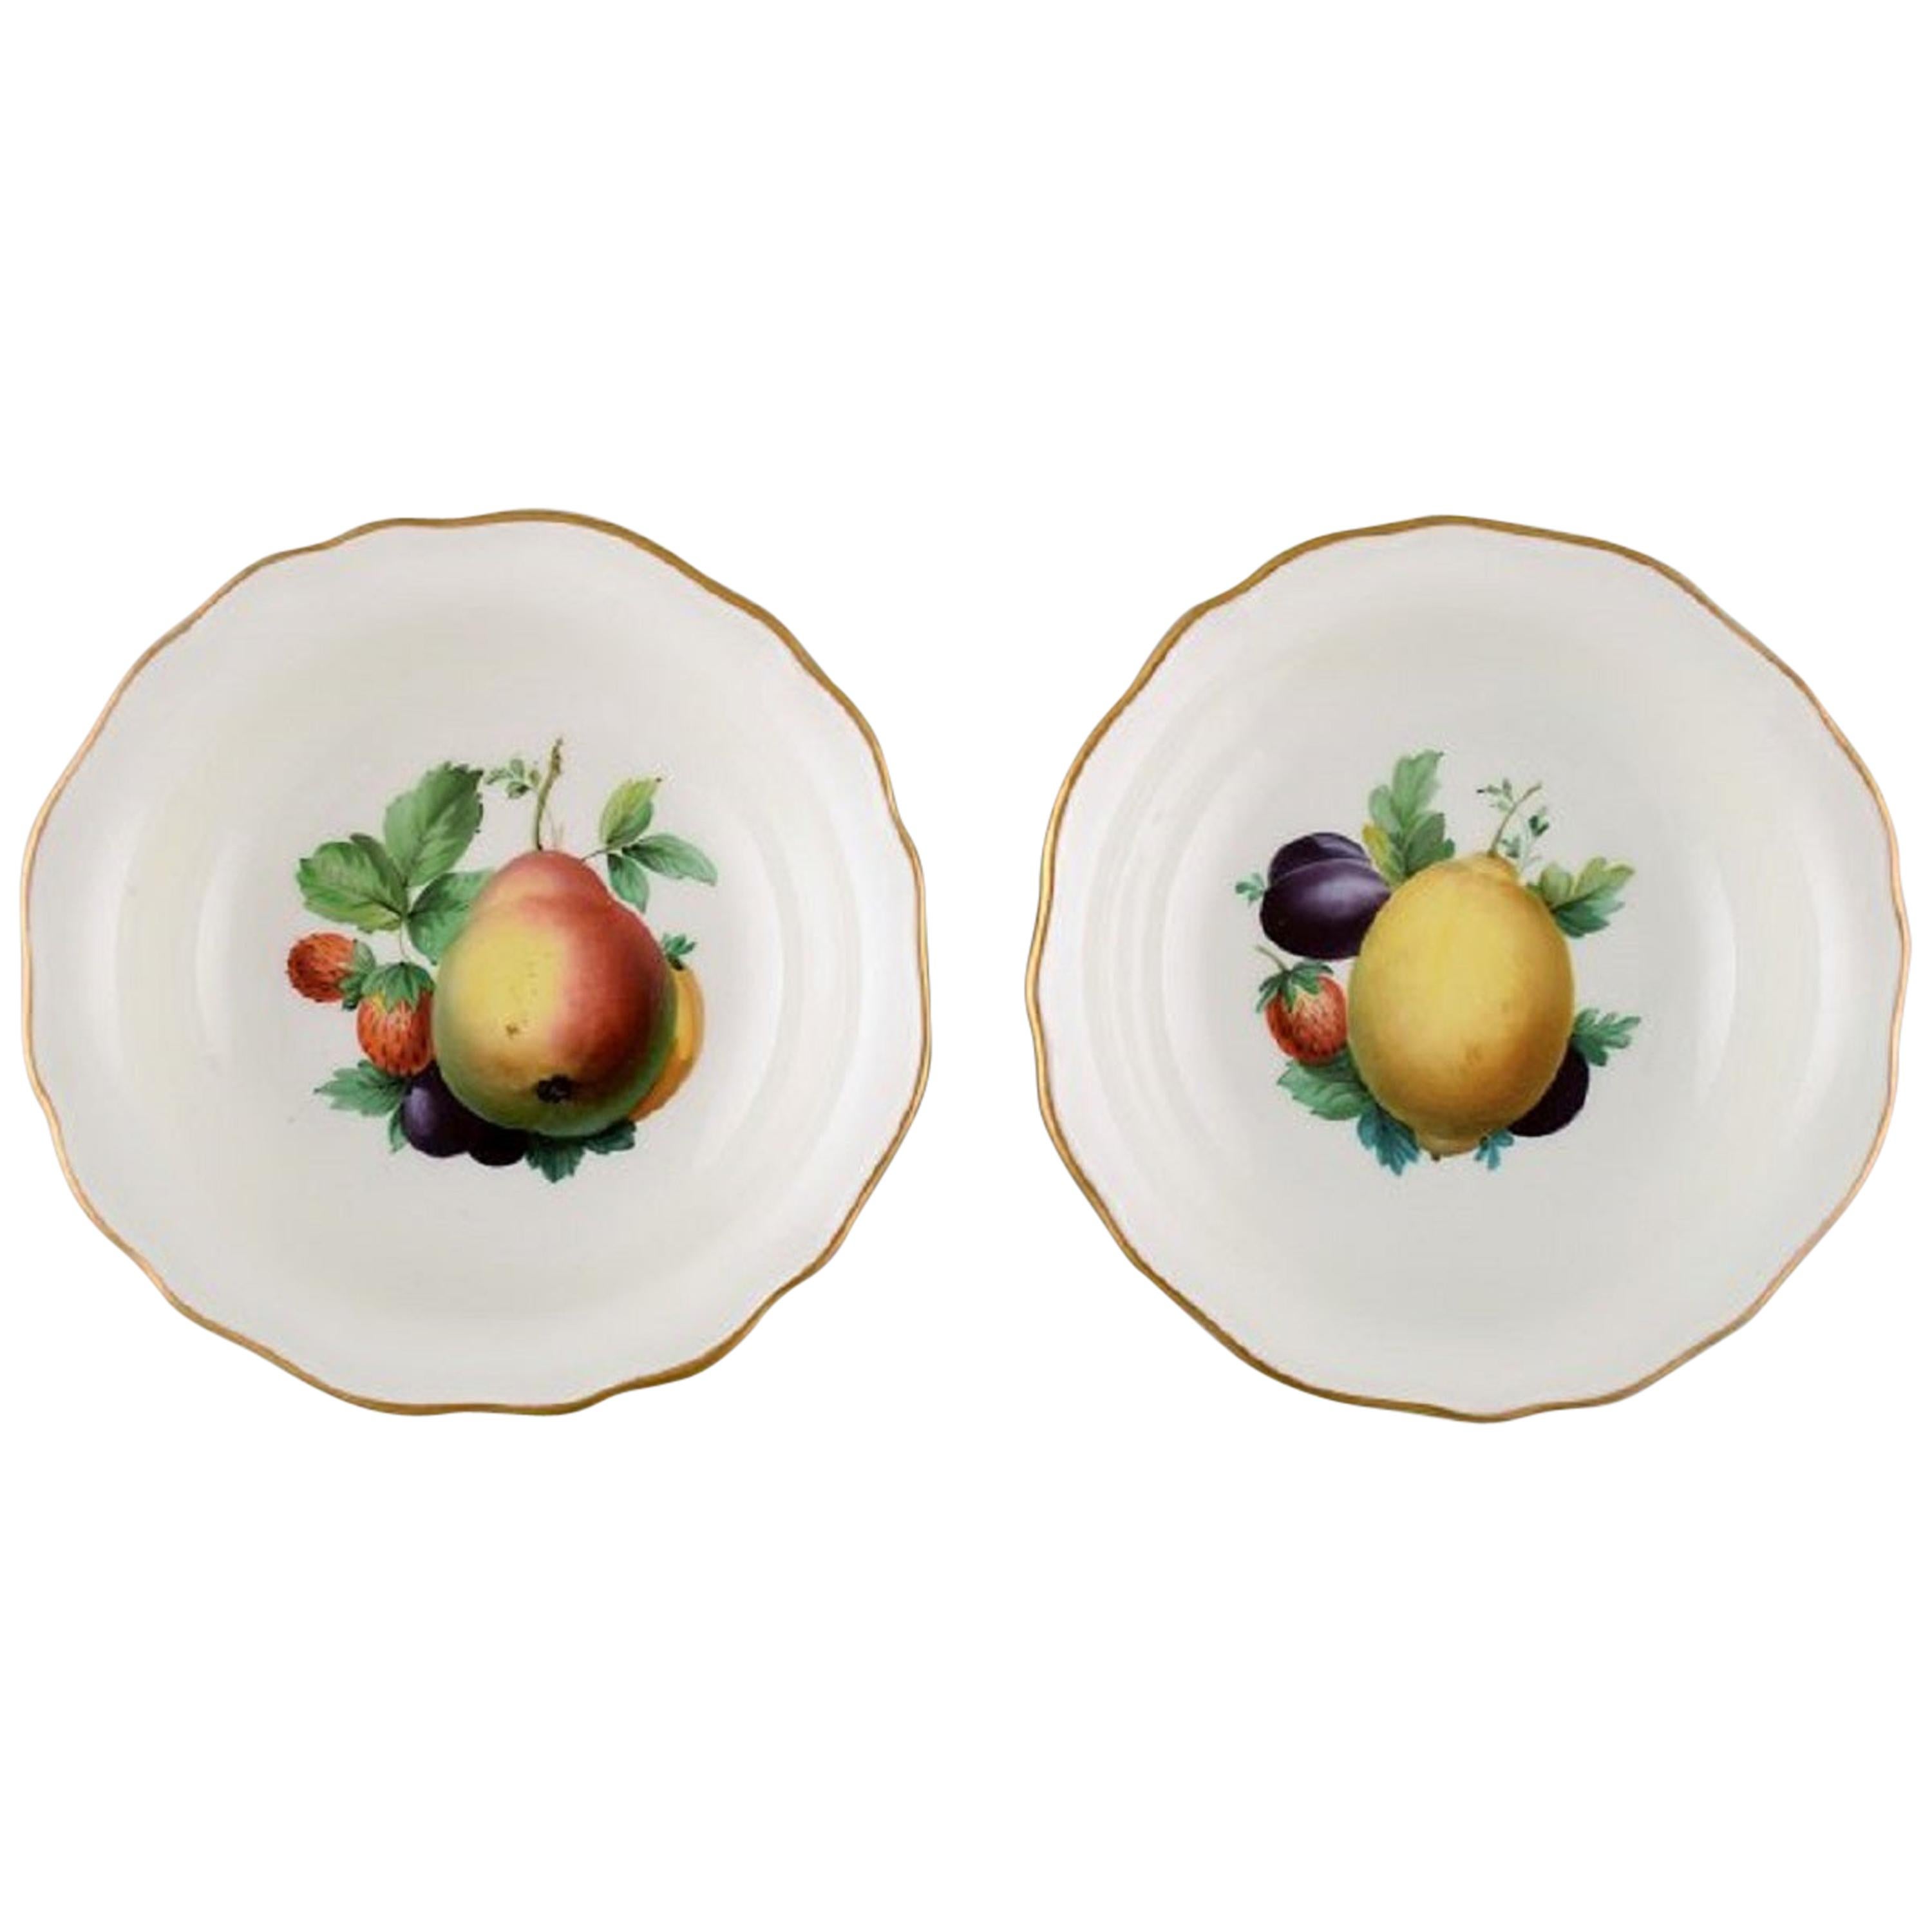 Two Meissen Bowls in Hand Painted Porcelain with Fruit Motifs and Gold Edge